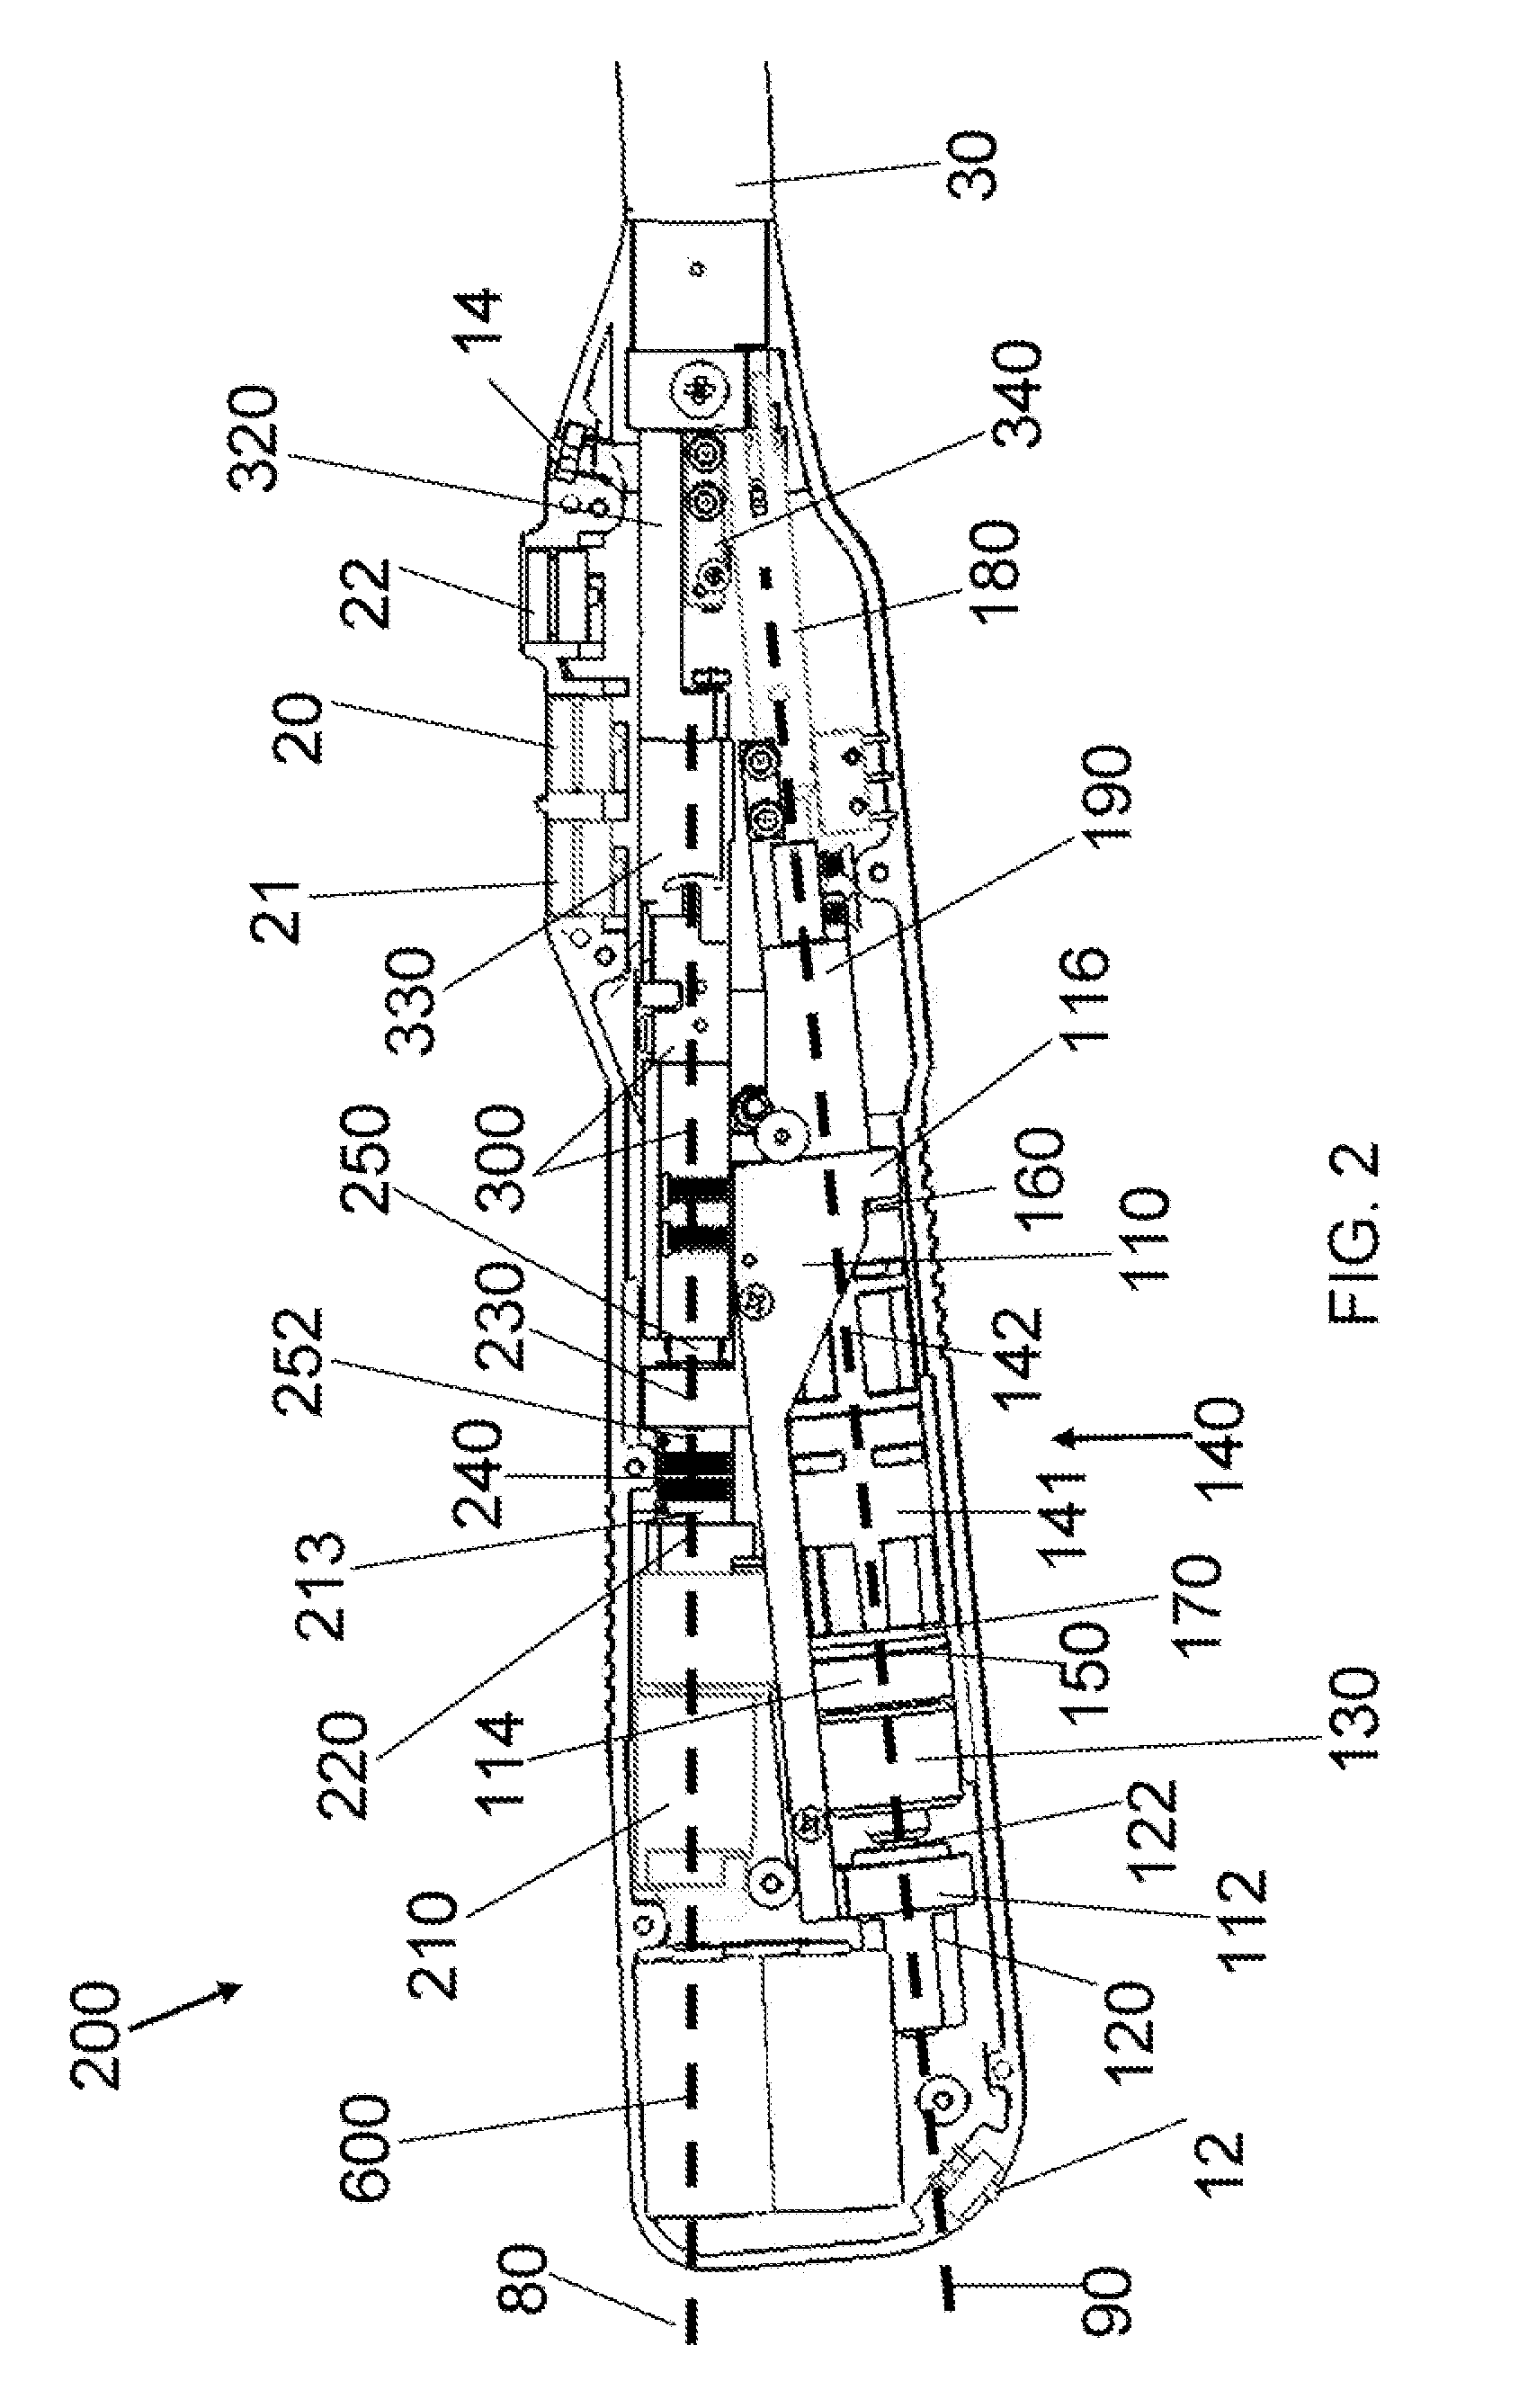 Active braking electrical surgical iinstrument and method for braking such an instrument